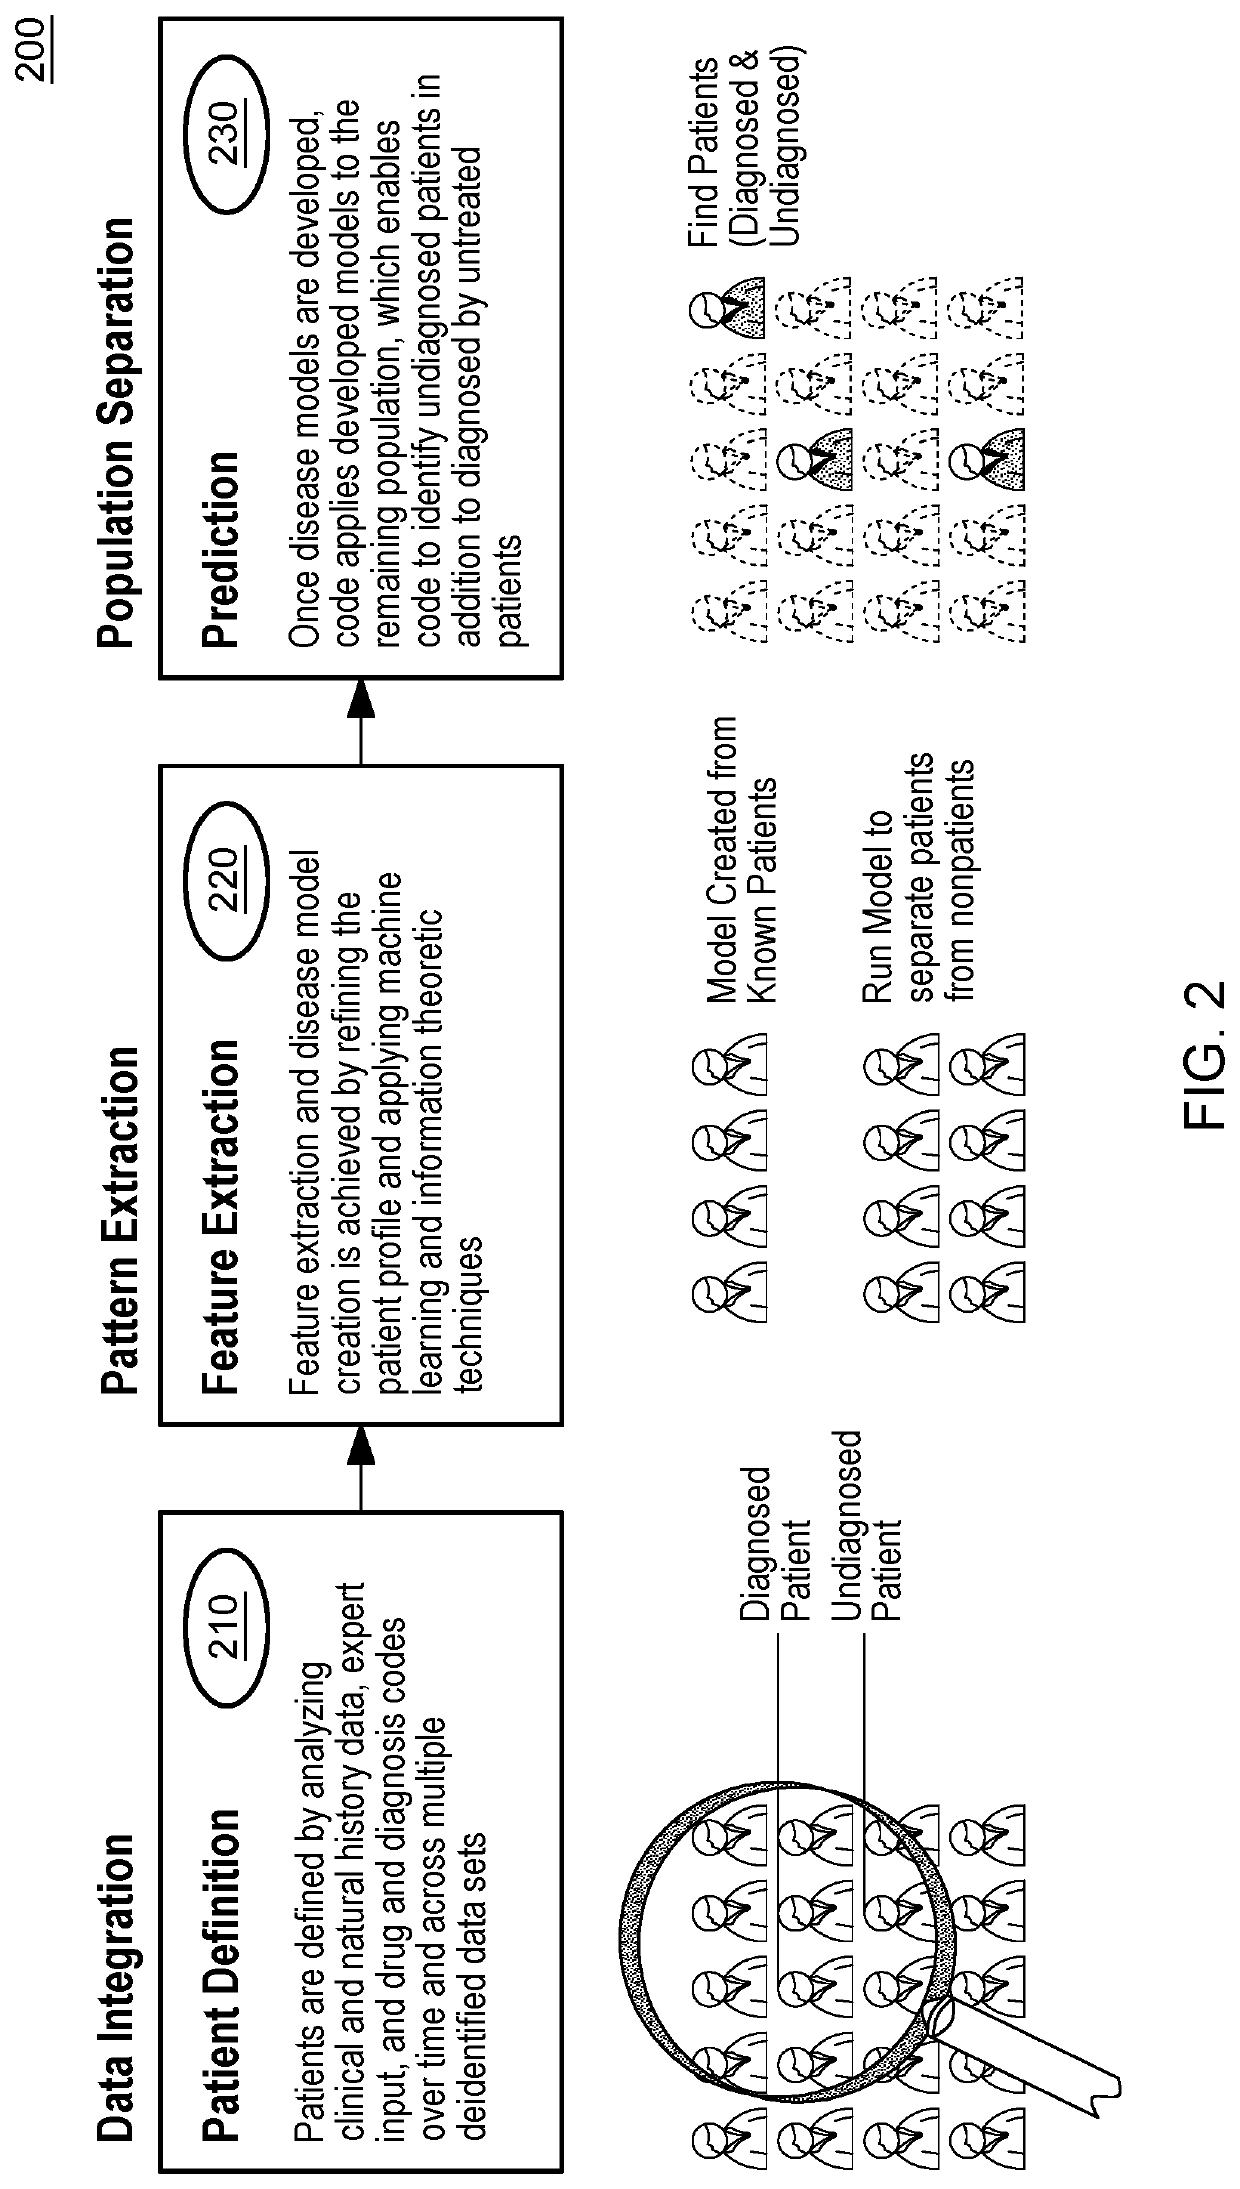 Machine-learning based query construction and pattern identification for hereditary angioedema